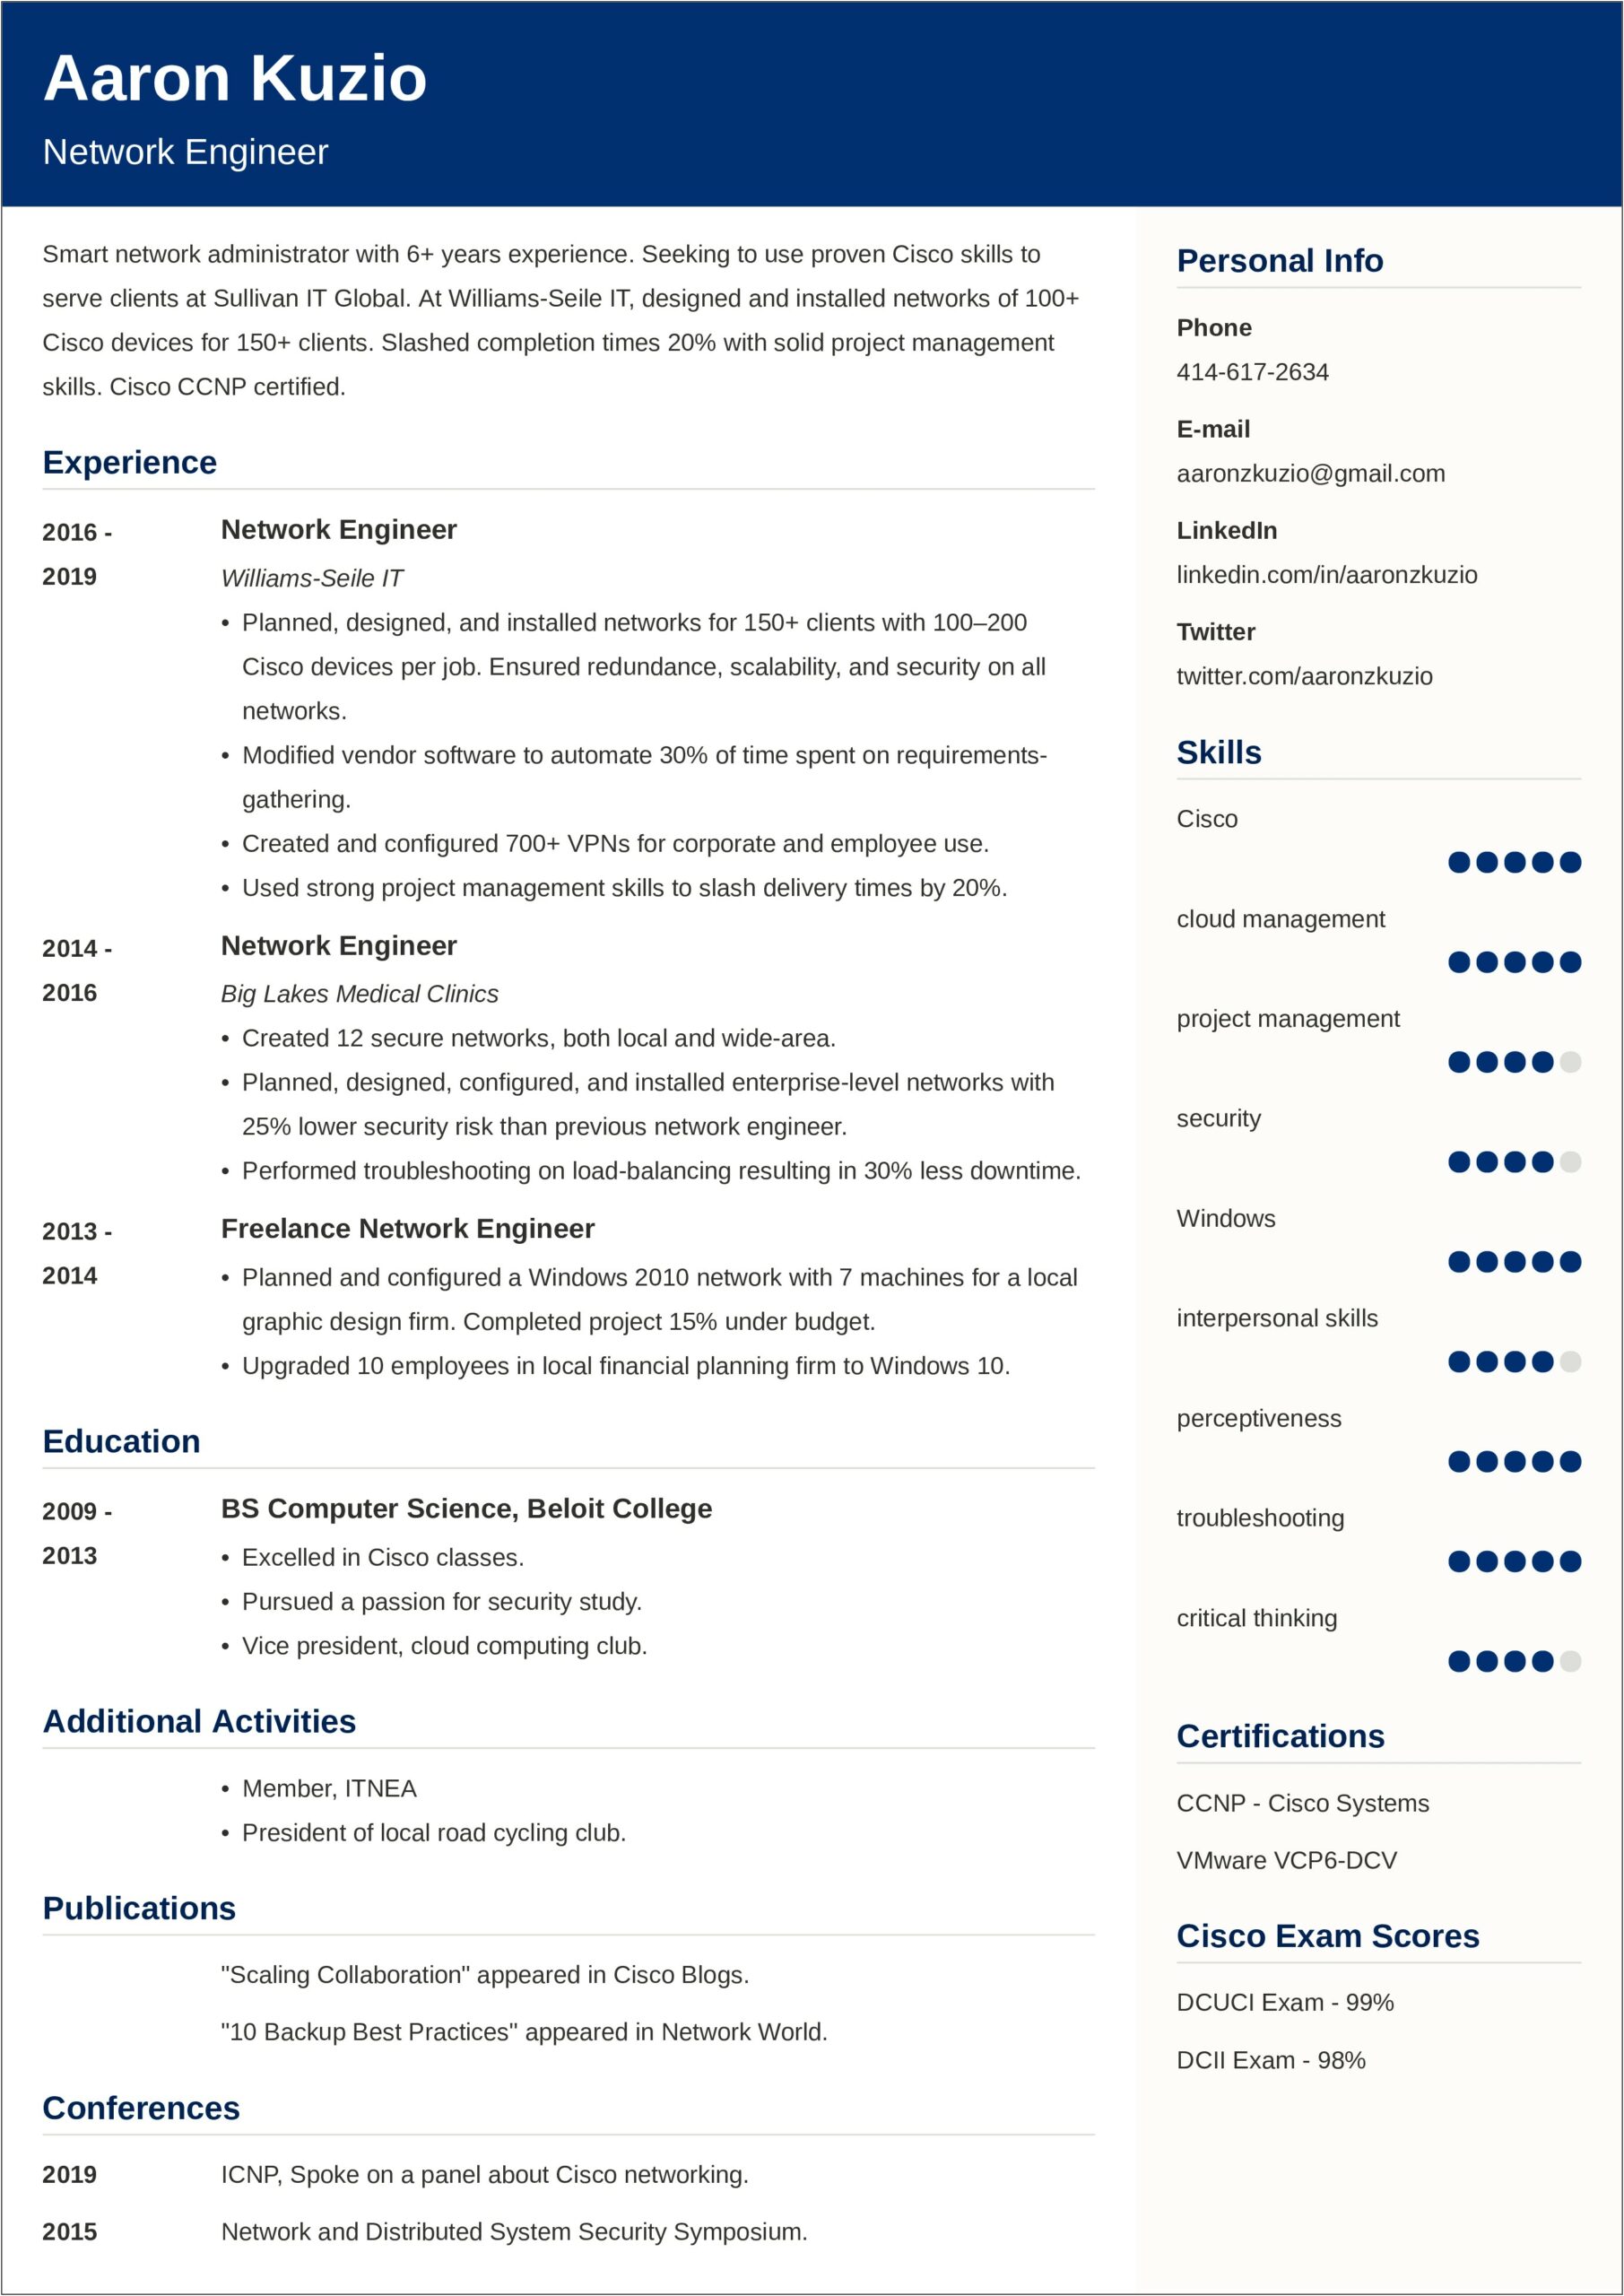 Skills And Abilities Categories For Resume